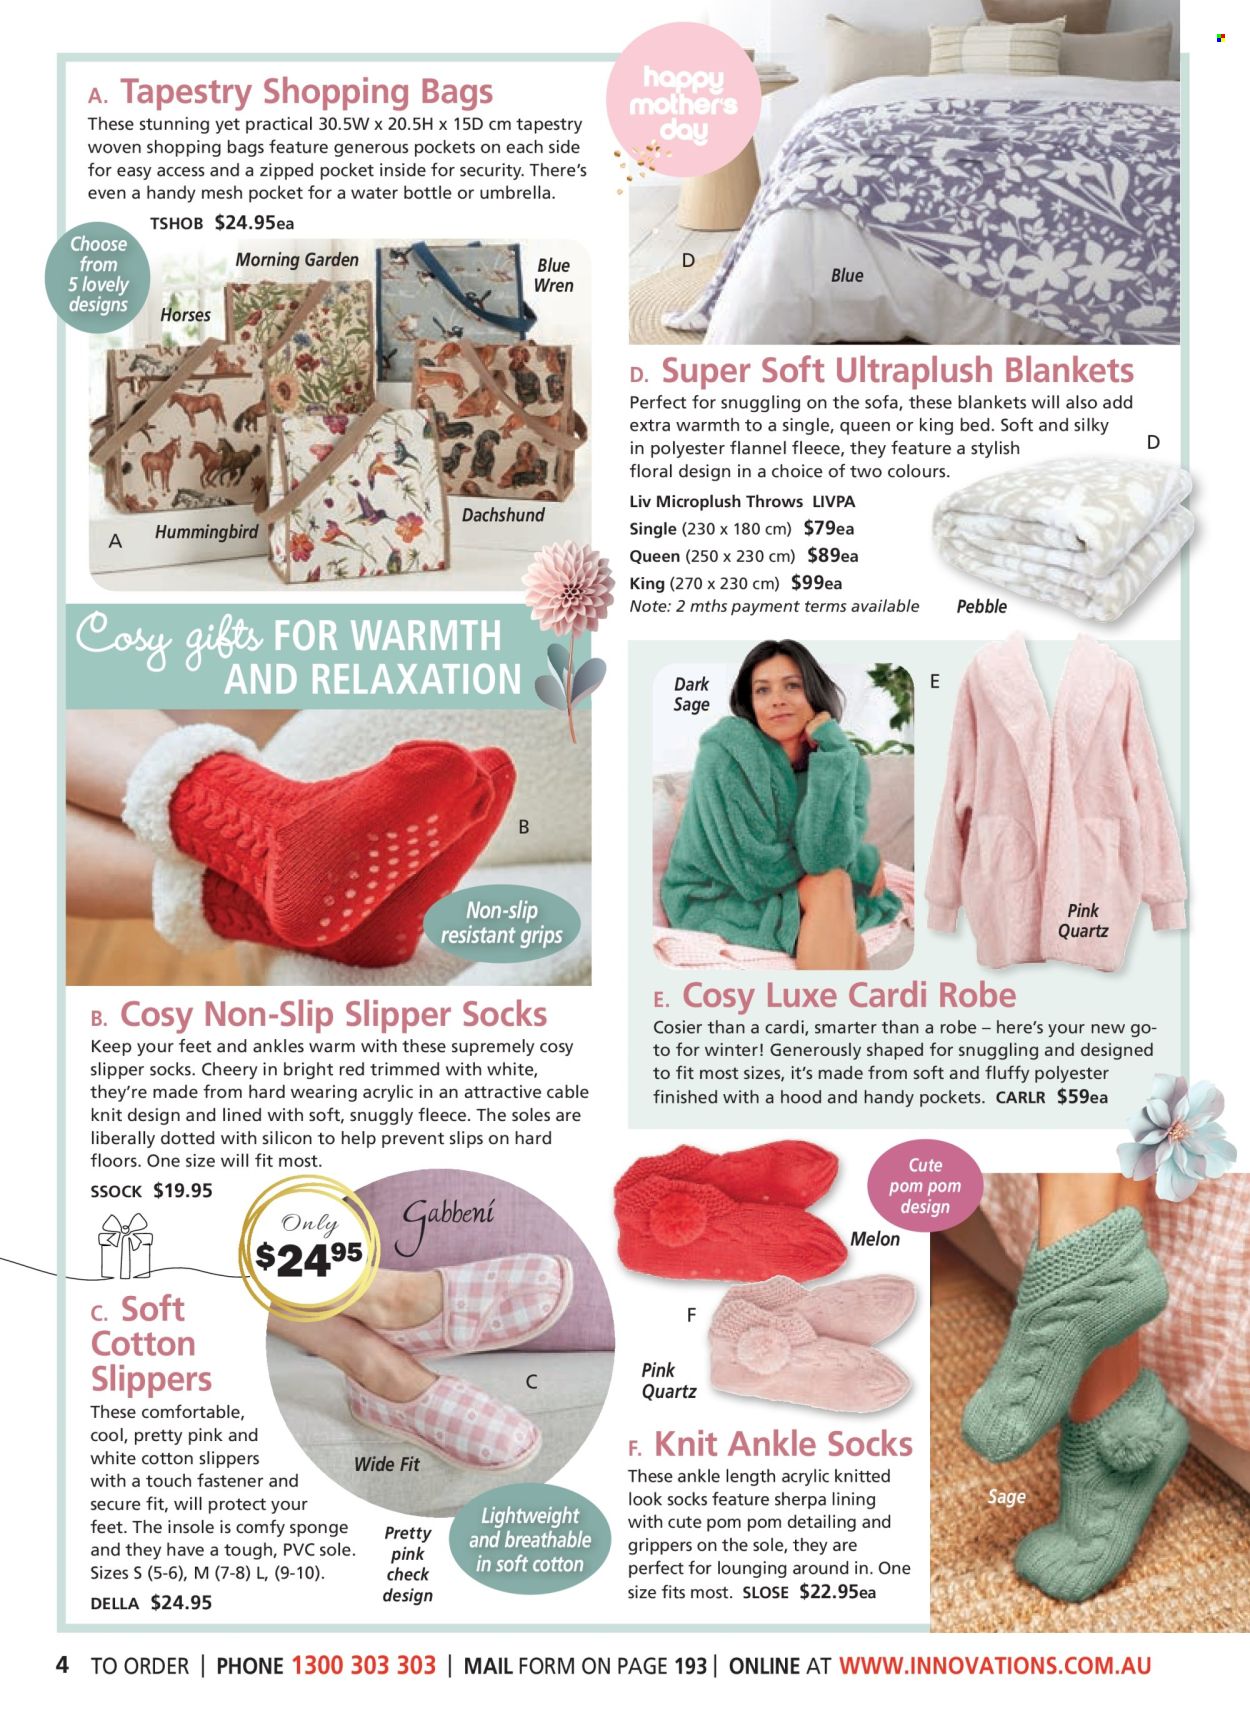 thumbnail - Innovations Catalogue - Sales products - slippers, sponge, drink bottle, bag, blanket, tapestry, socks, umbrella, robe. Page 4.